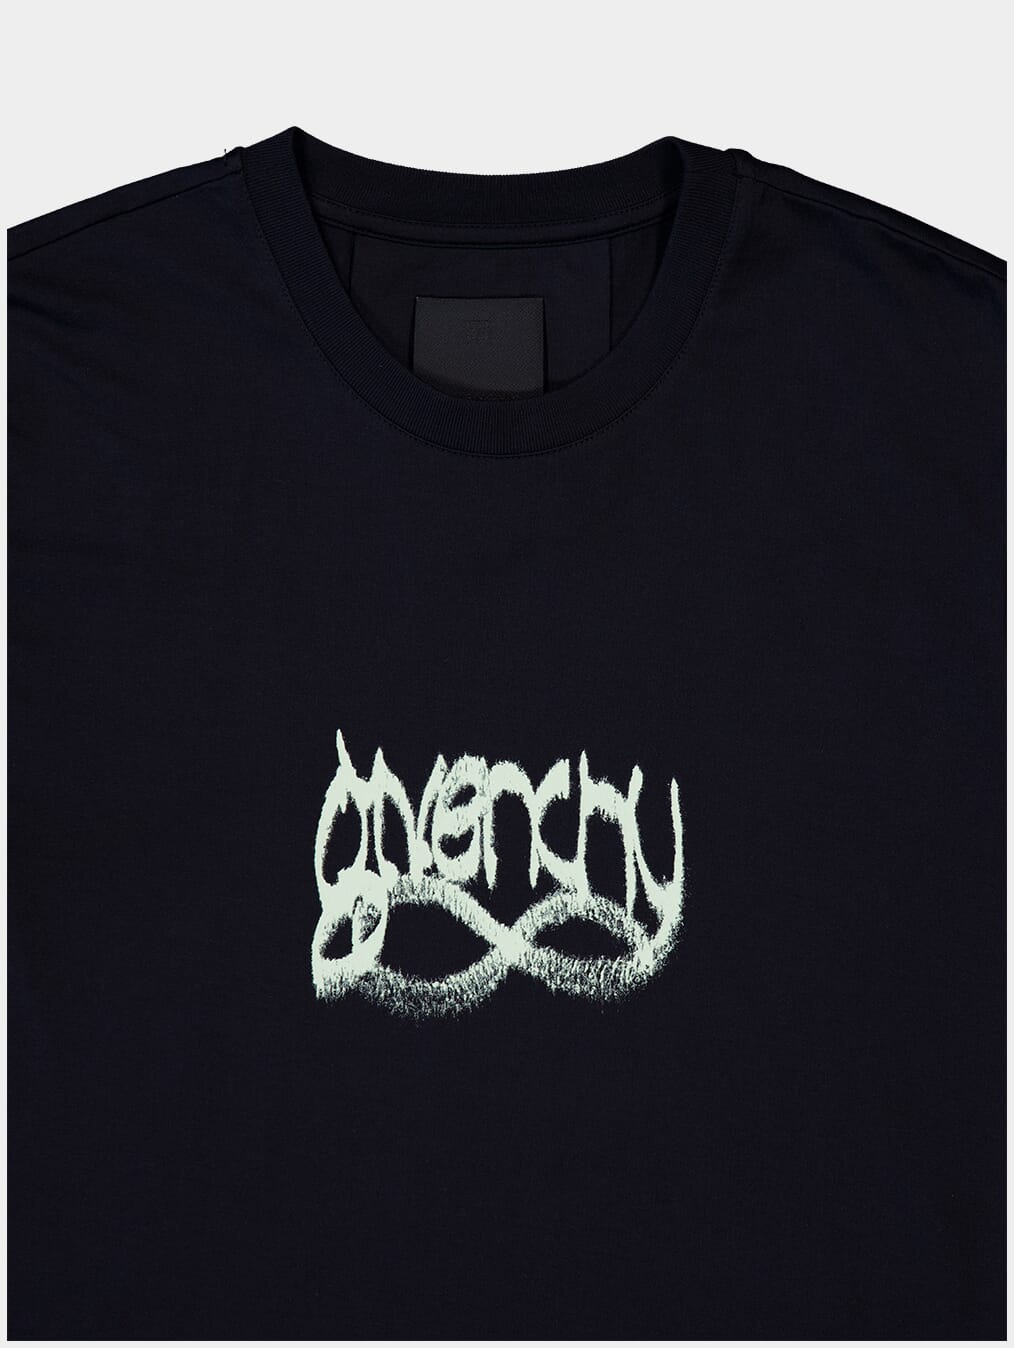 GivenchyX Chito Slim Fit Cotton T-Shirt With GIVENCHY Infinity Print at Fashion Clinic